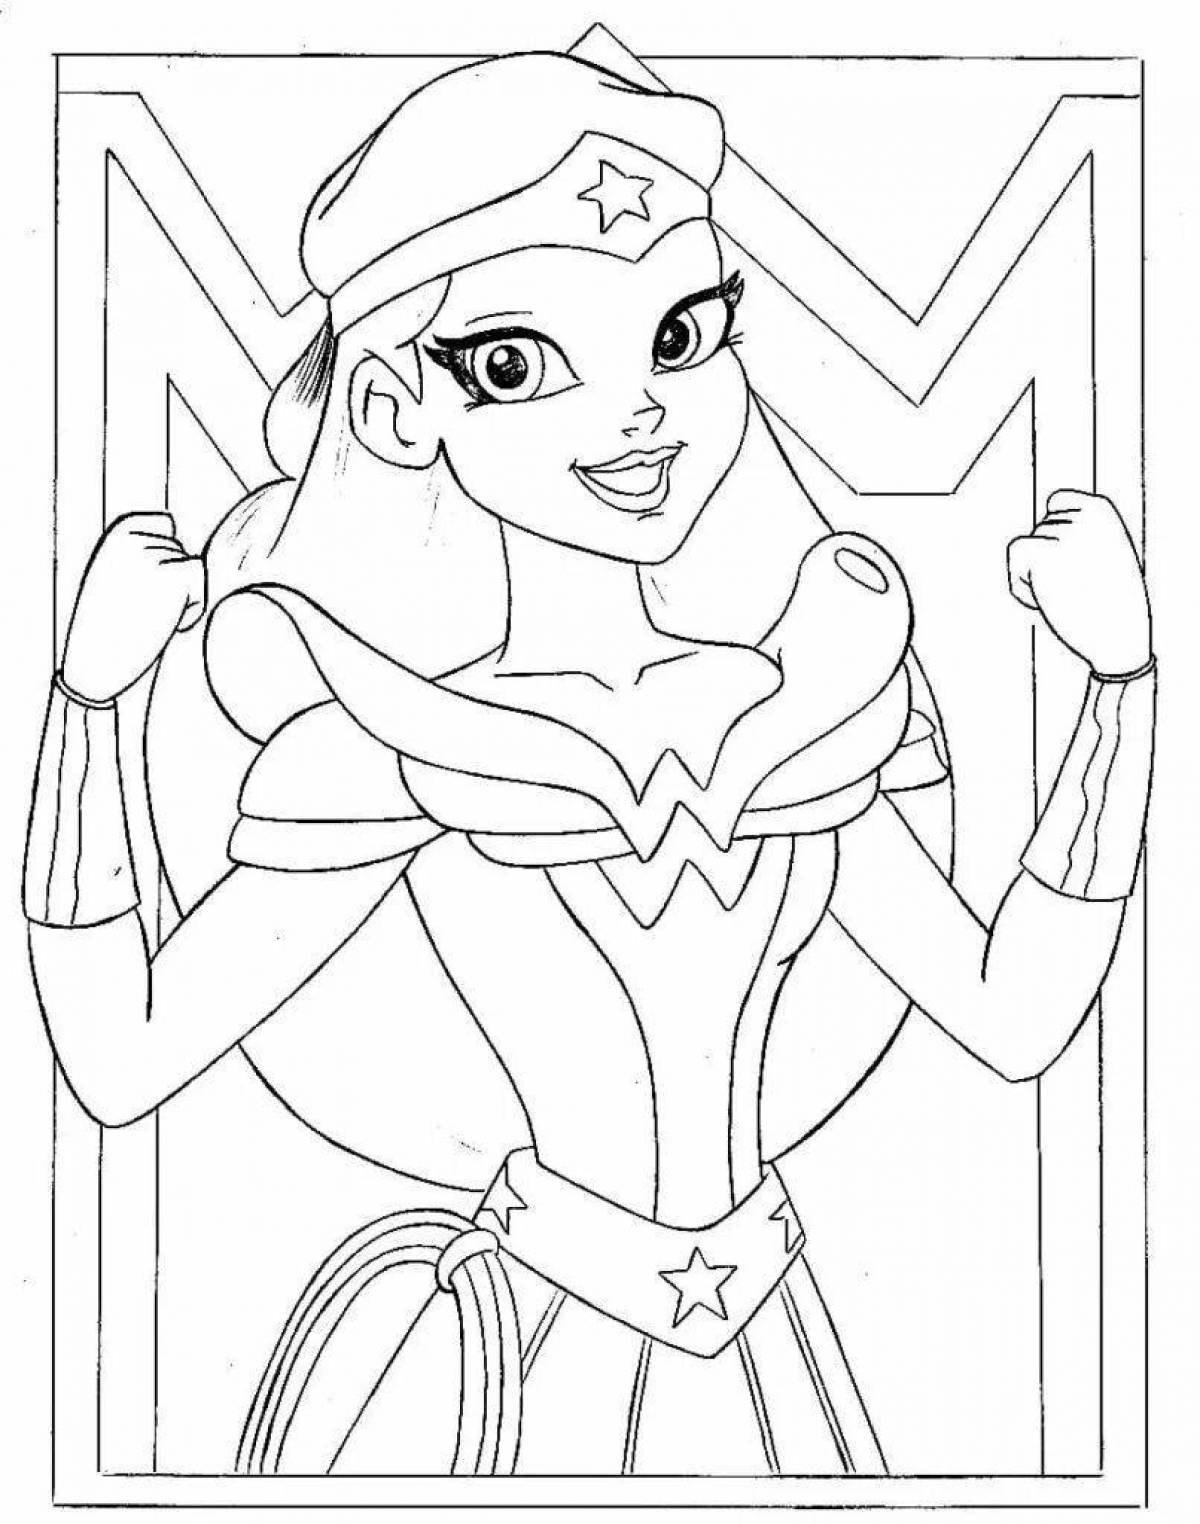 Coloring pages of colorful superhero girls